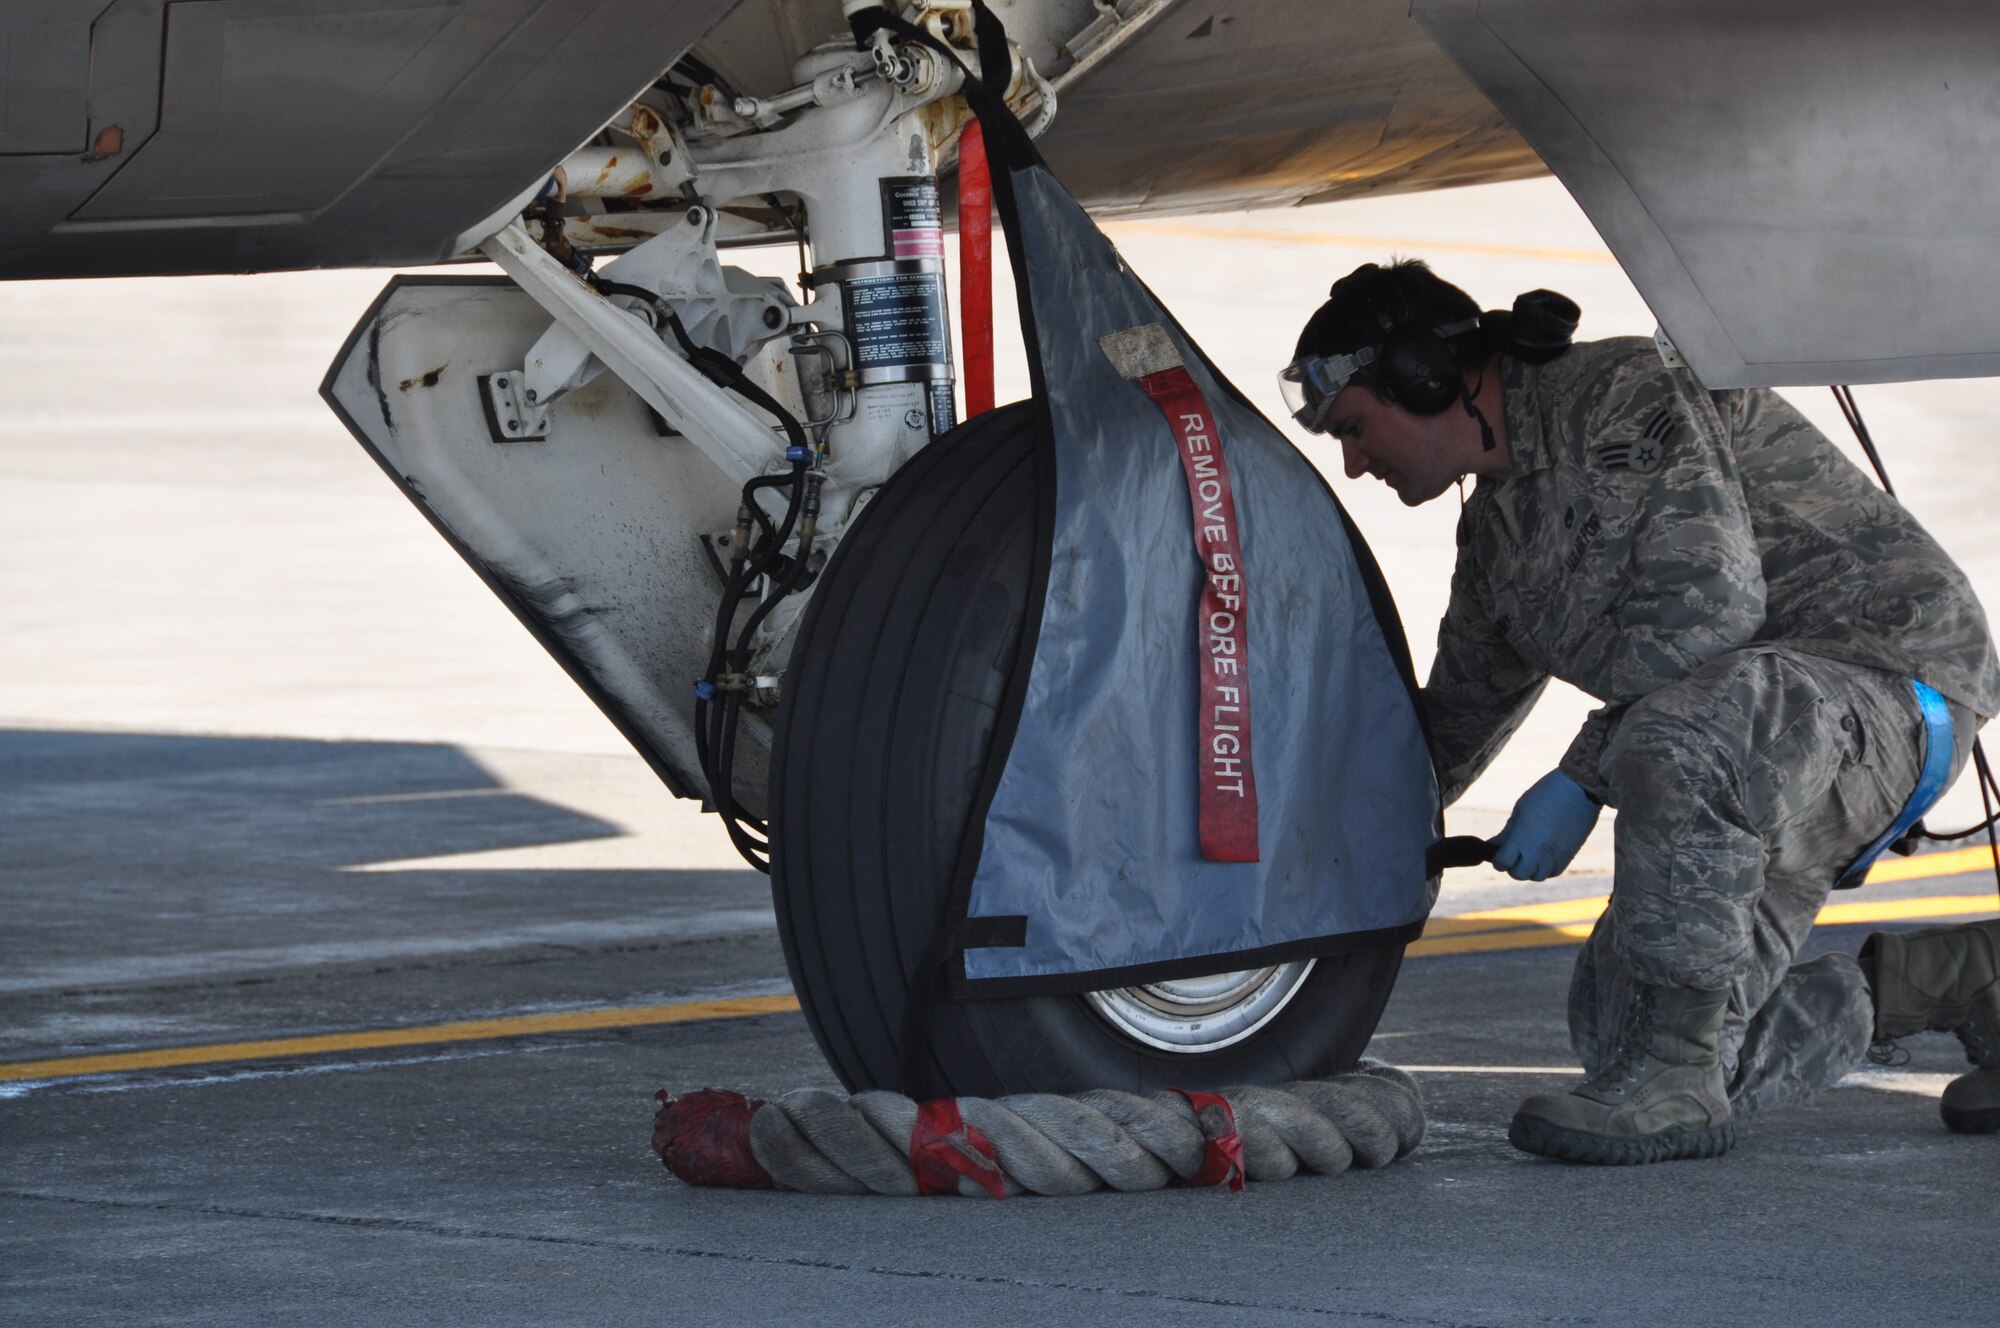 Senior Airman James Hadaway, 3rd Aircraft Maintenance Squadron avionics specialist, along with Airmen from the 3rd Aircraft Maintenance Squadron and 673rd Logistics Readiness Squadron, perform a hot pit refuel with an F-22 here. Hot pit refueling is a procedure performed in order to rapidly refuel the aircraft and allow it to complete a second sortie in a short amount of time. During a hot pit refuel the pilot will stay in the cockpit with the jet running while the maintenance crews perform safety checks and refuel the aircraft allowing it to return to flight in minimum. (U.S. Air Force/Capt. Ashley Conner) 